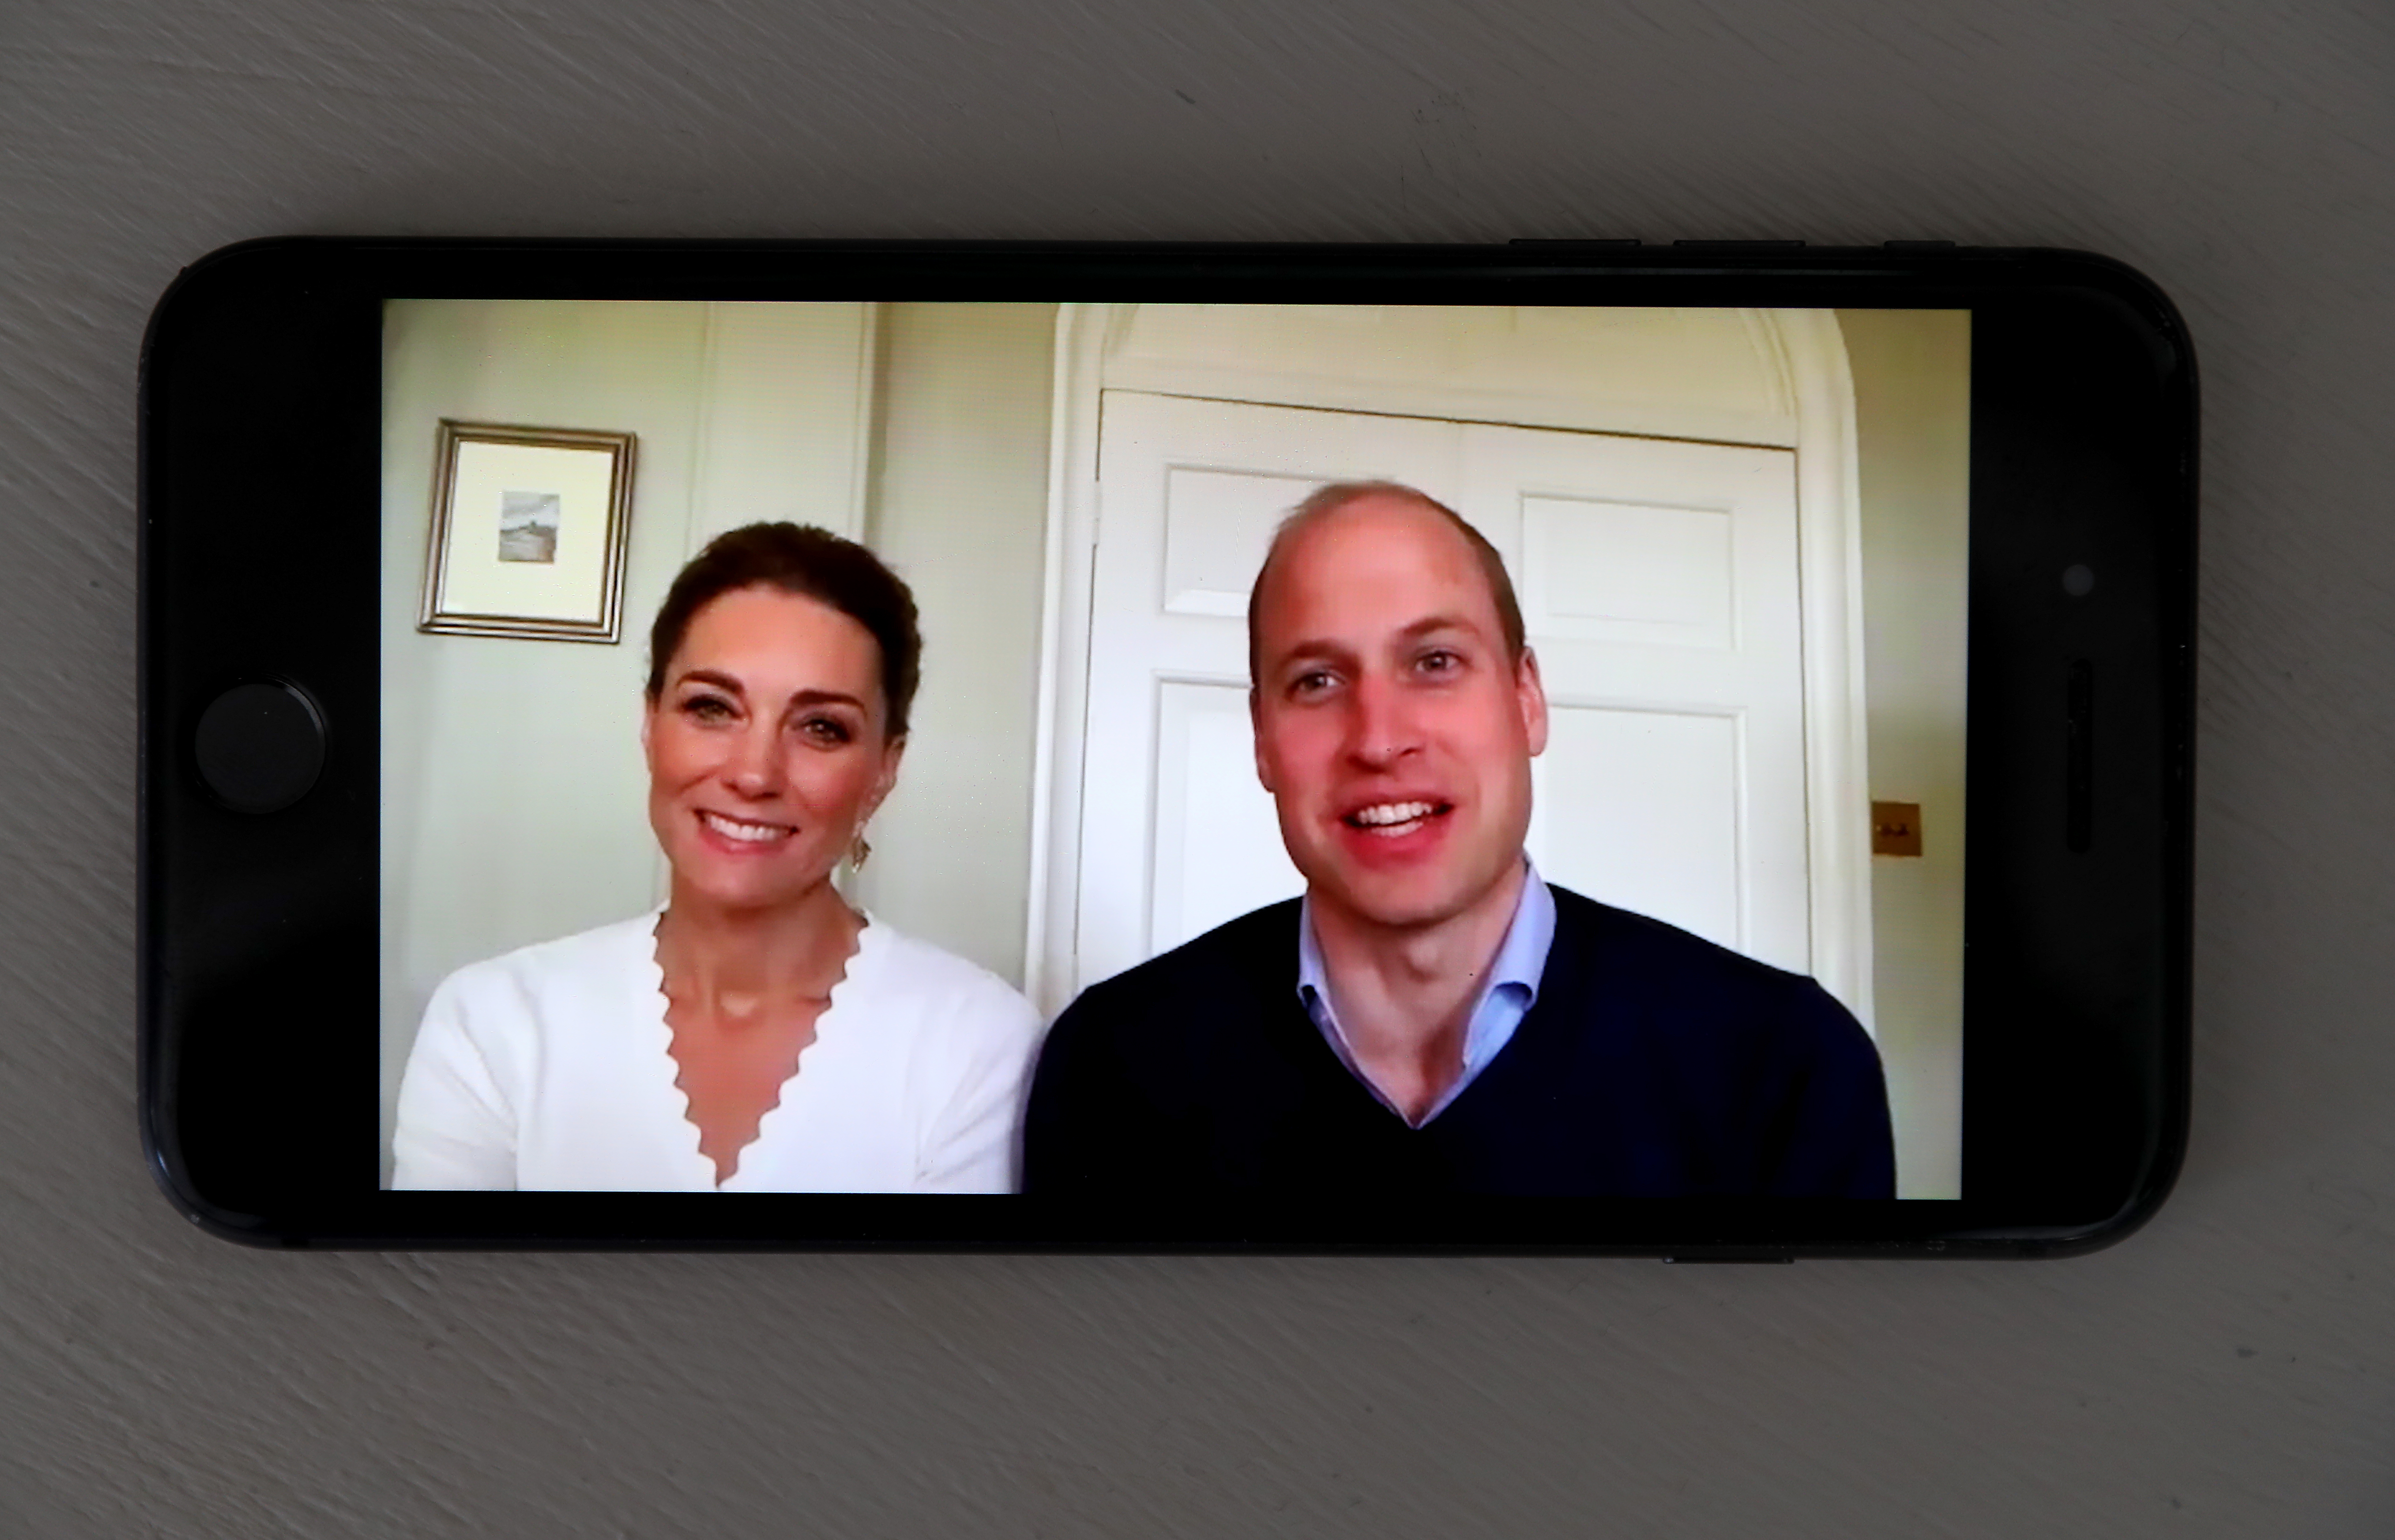 Prince William and Kate Middleton during a video-call on May 15, 2020, in London, England. | Source: Getty Images